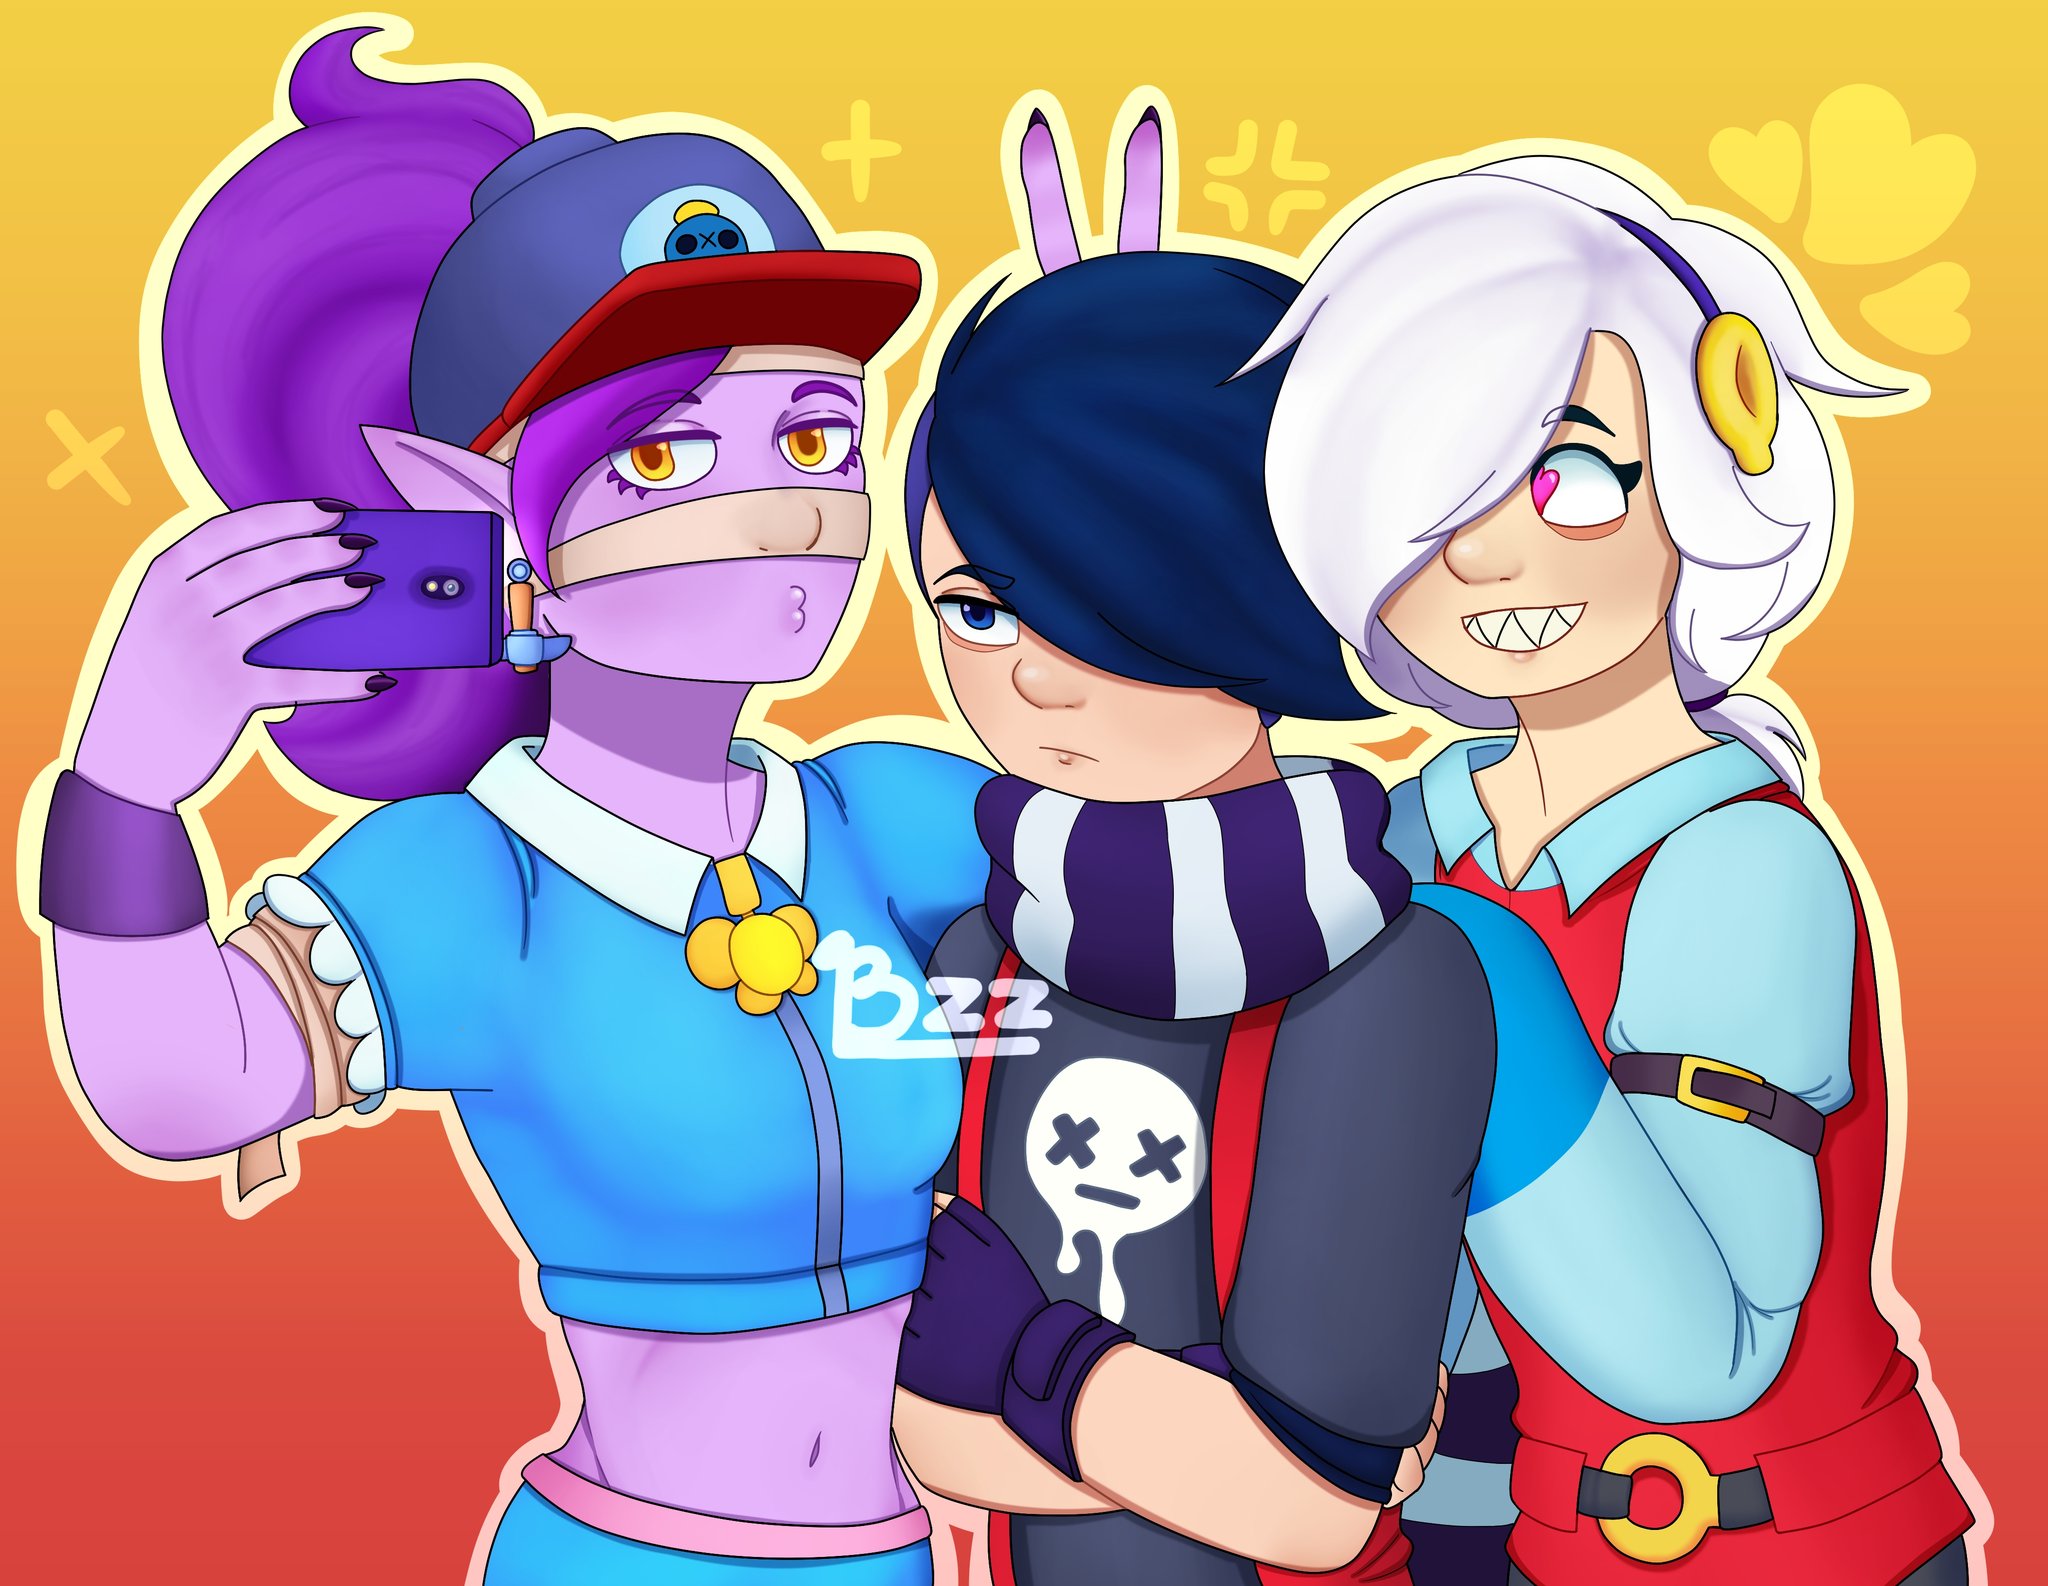 Bzzzz321 On Twitter Emz With Edgar And Colette Brawlstars Listening To Edgar S Voice Lines He Remembered Me To Emz So I Wanted To Draw Them Https T Co Nucnncdmjo - edgar voice lines brawl stars